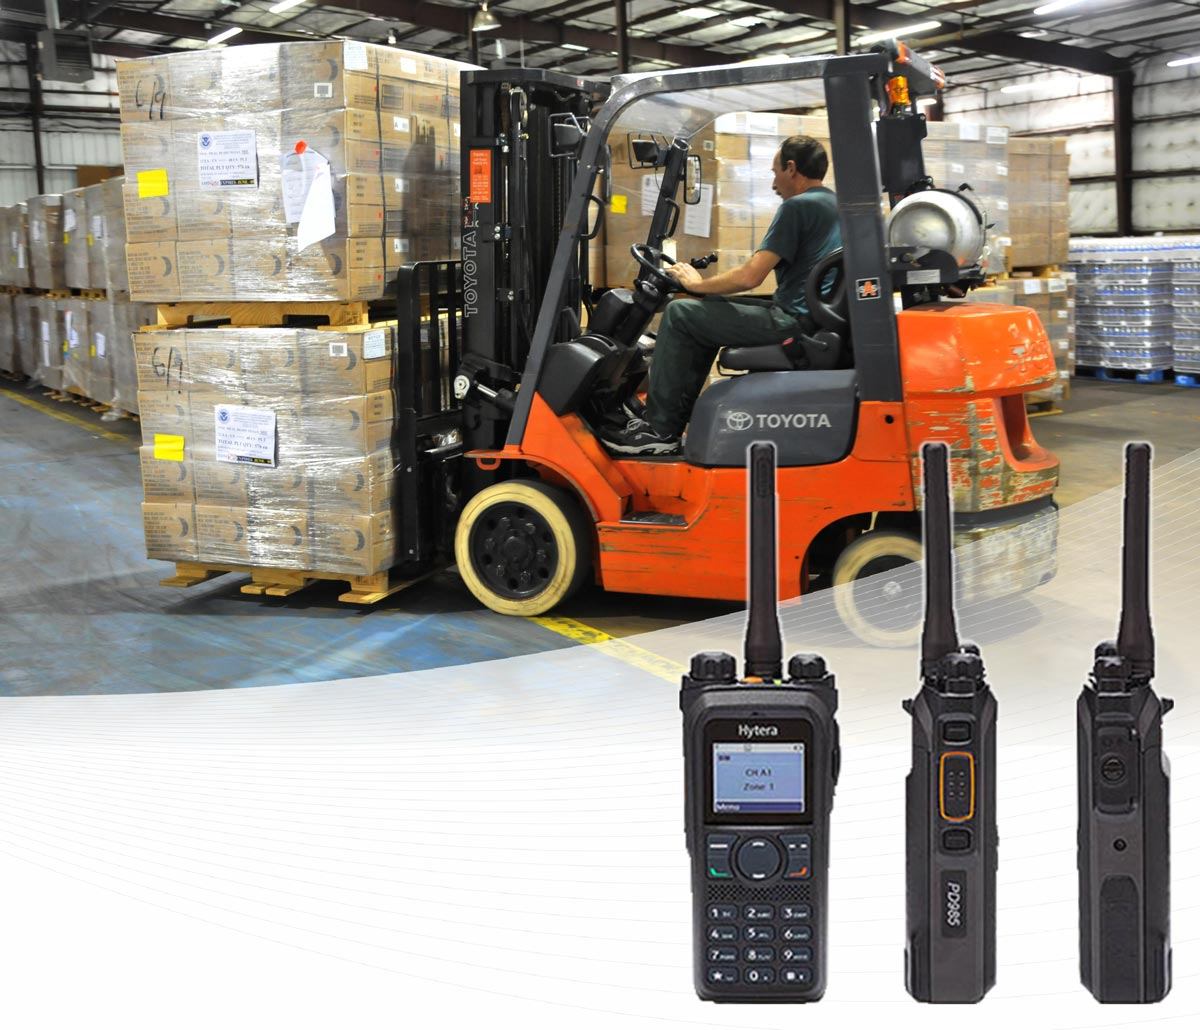 Hytera PD982 Feature-Rich Digital Two-Way Radio Footer